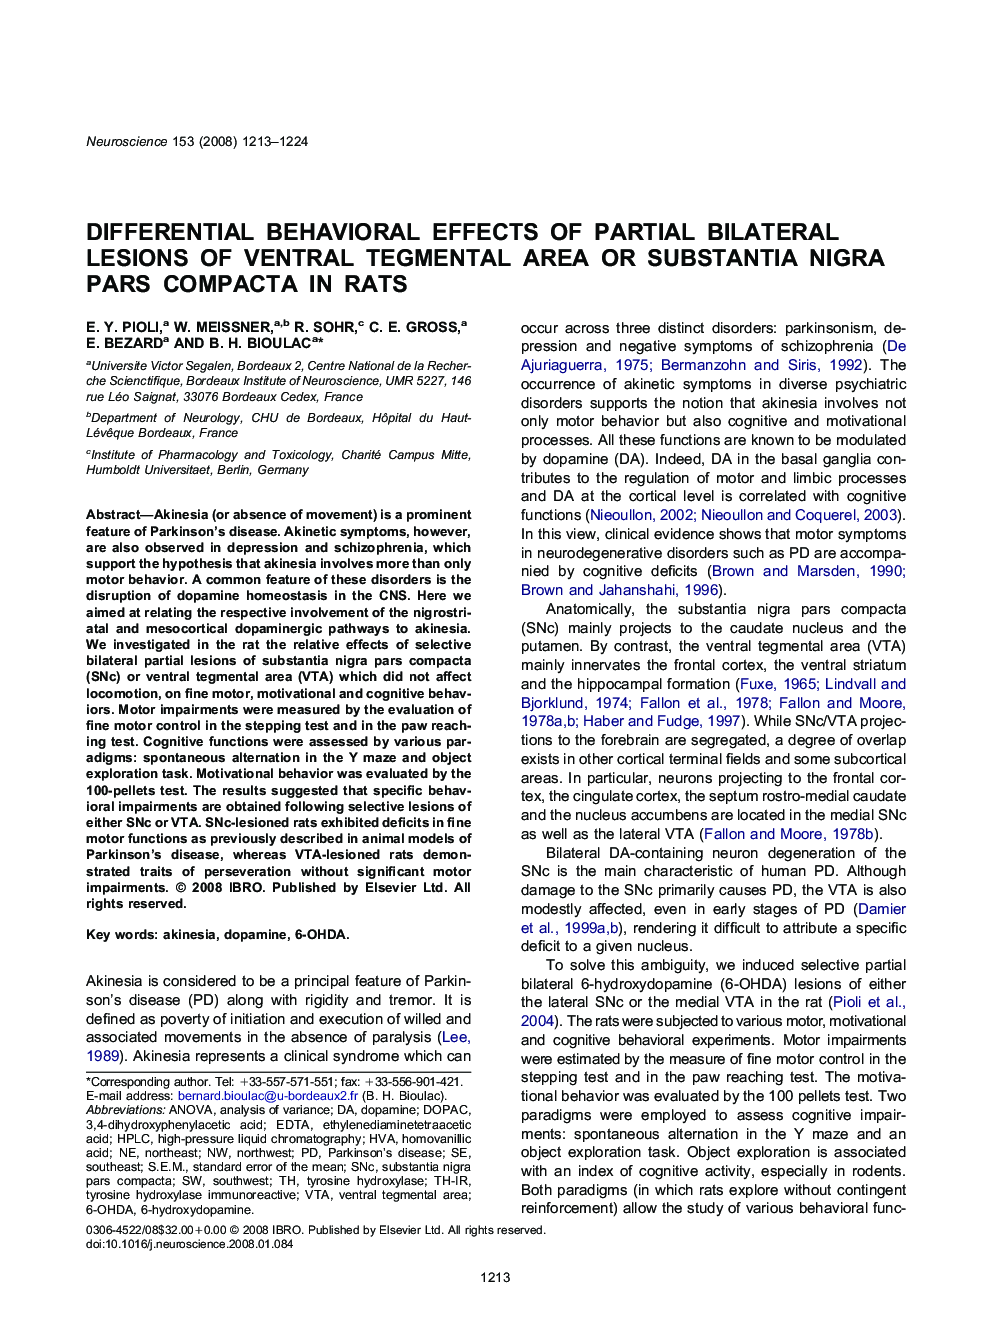 Differential behavioral effects of partial bilateral lesions of ventral tegmental area or substantia nigra pars compacta in rats